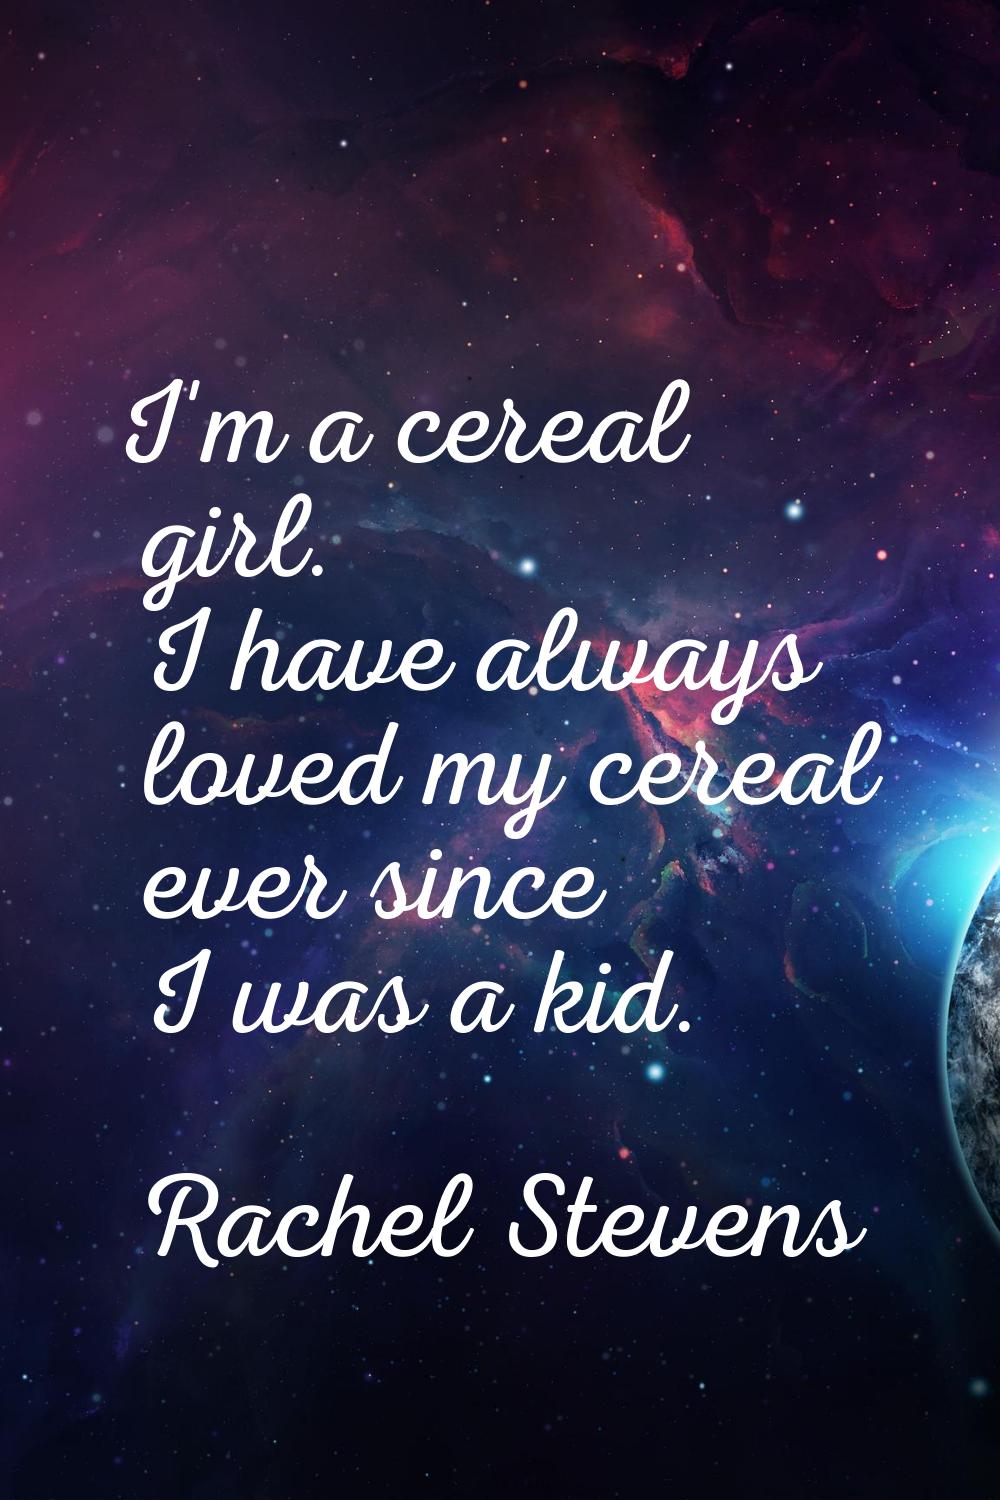 I'm a cereal girl. I have always loved my cereal ever since I was a kid.